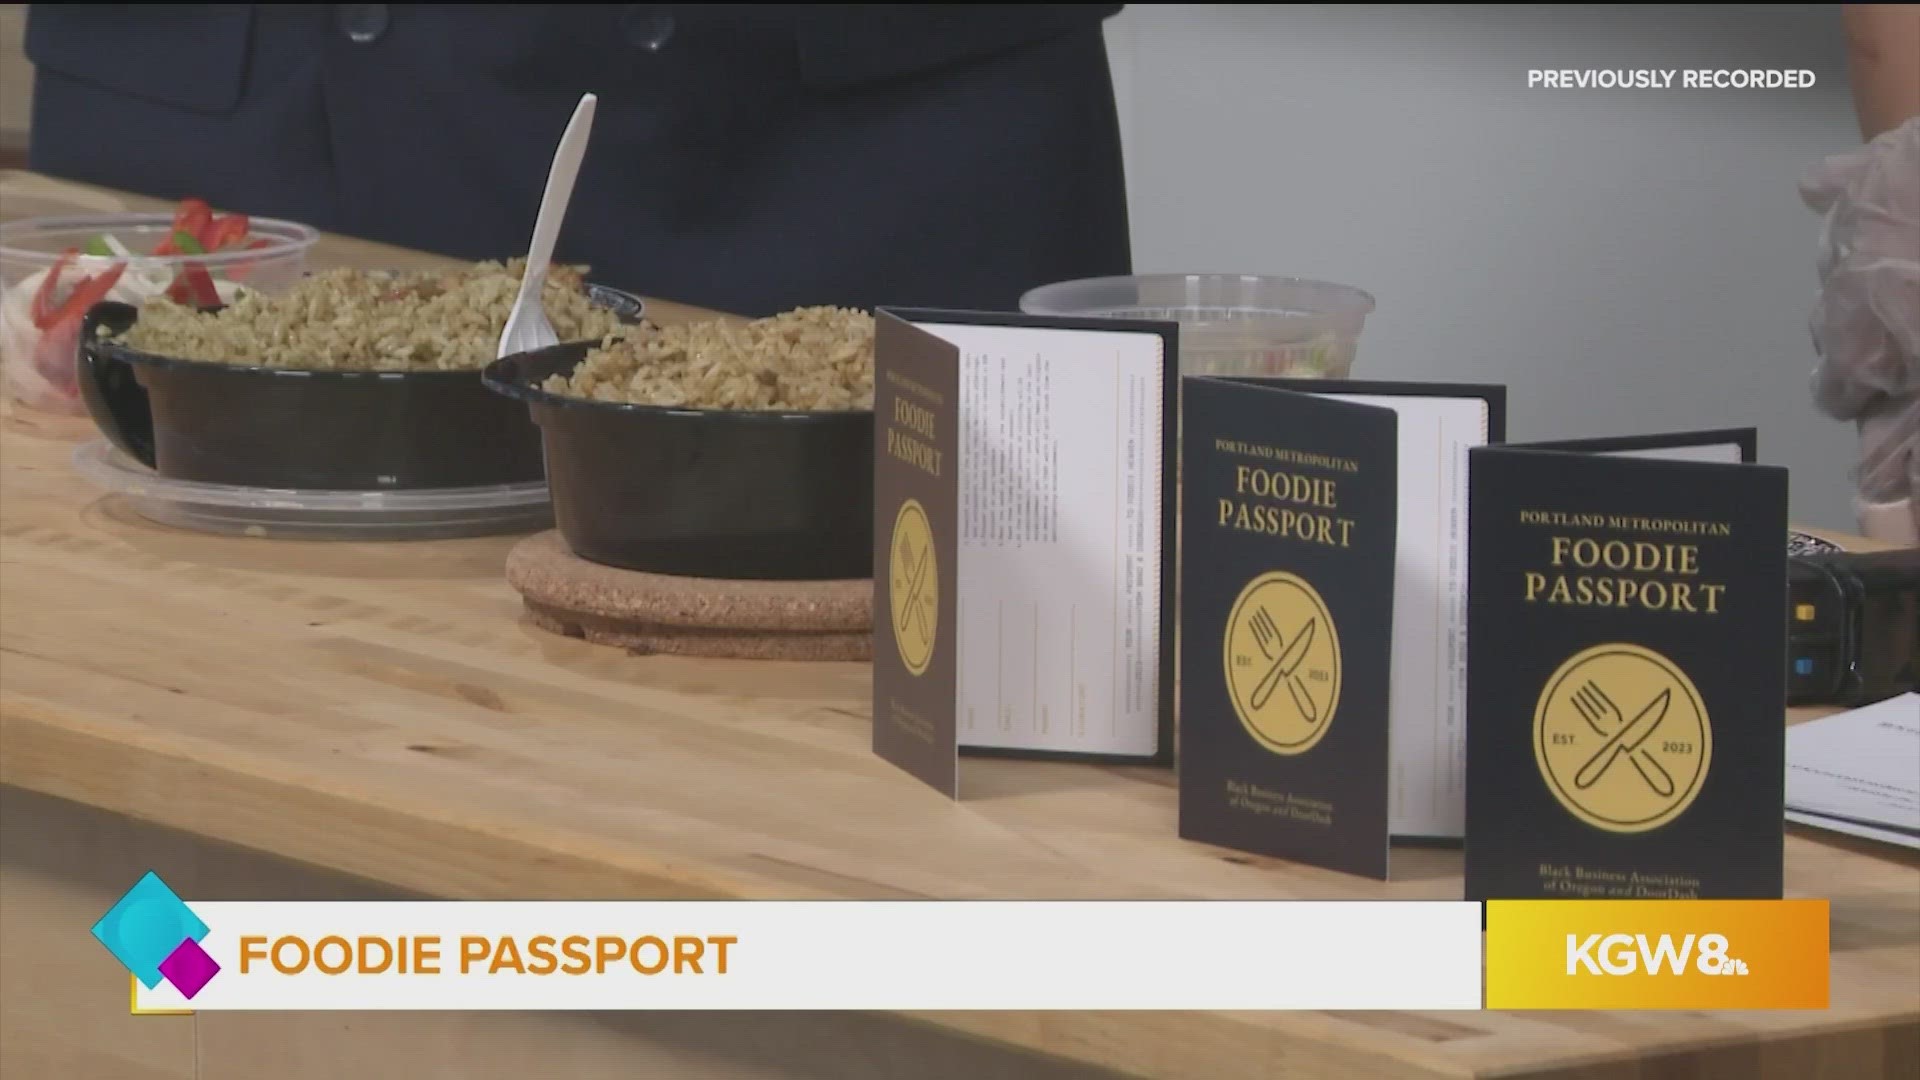 The Black Business Association of Oregon launched the Foodie Passport to support minority owned restaurants